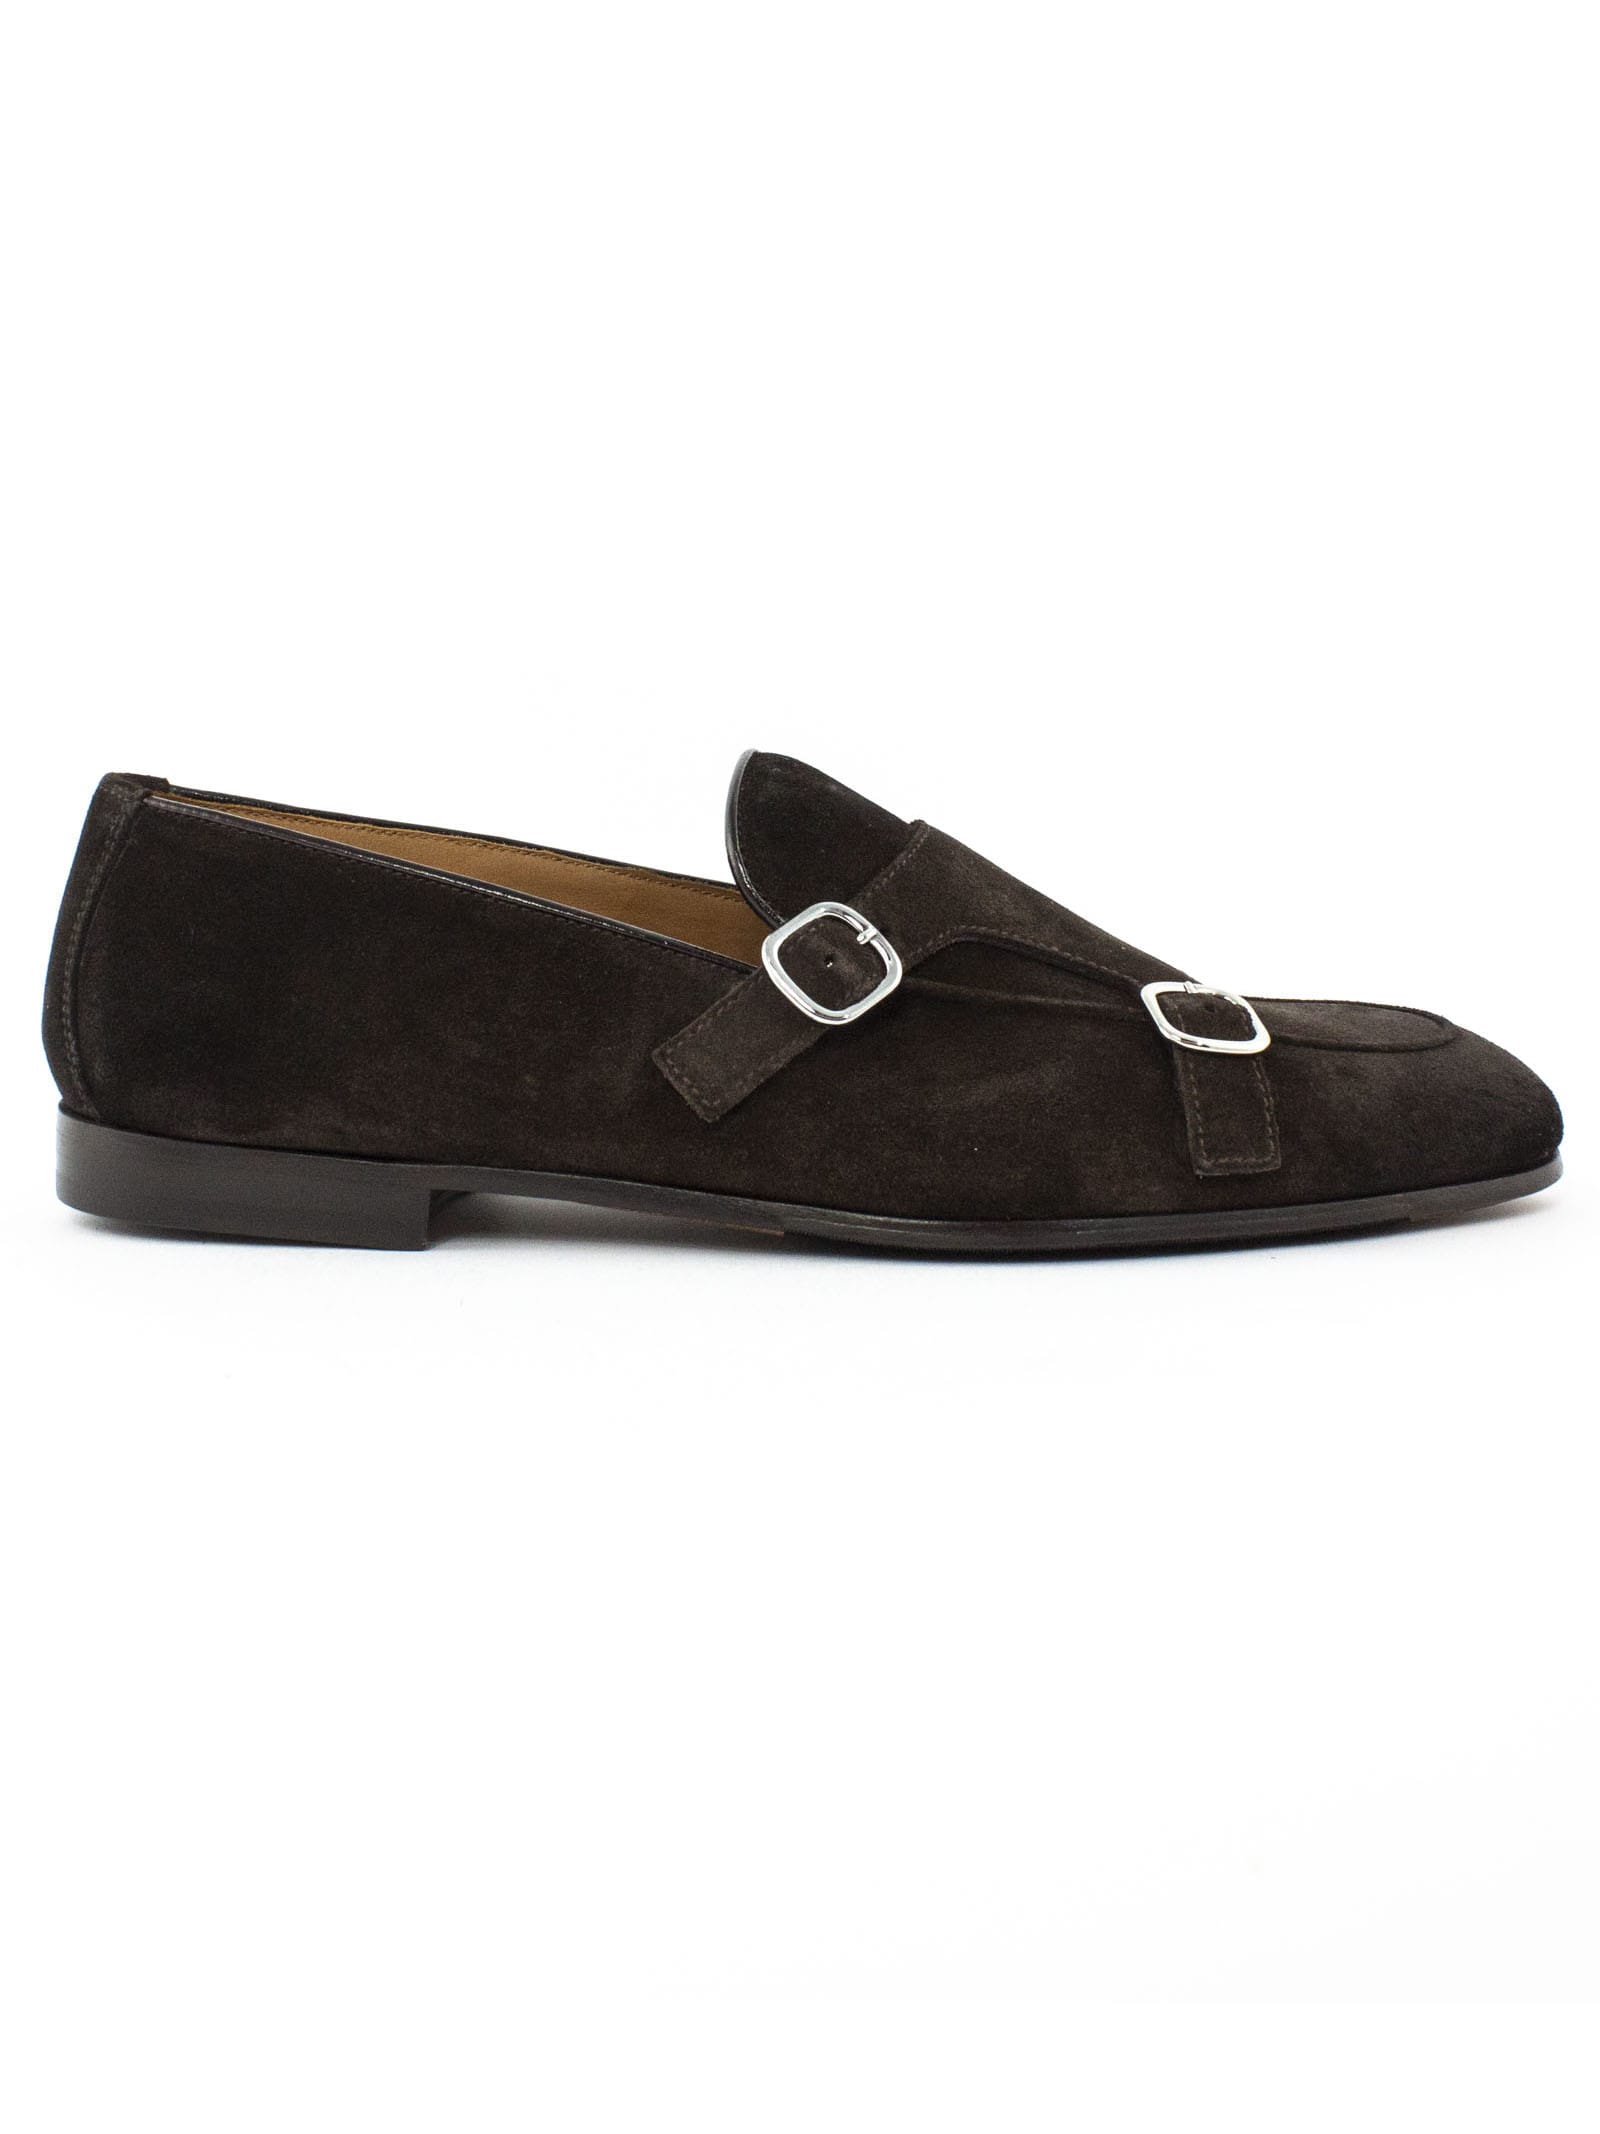 Doucals Brown Suede Loafers